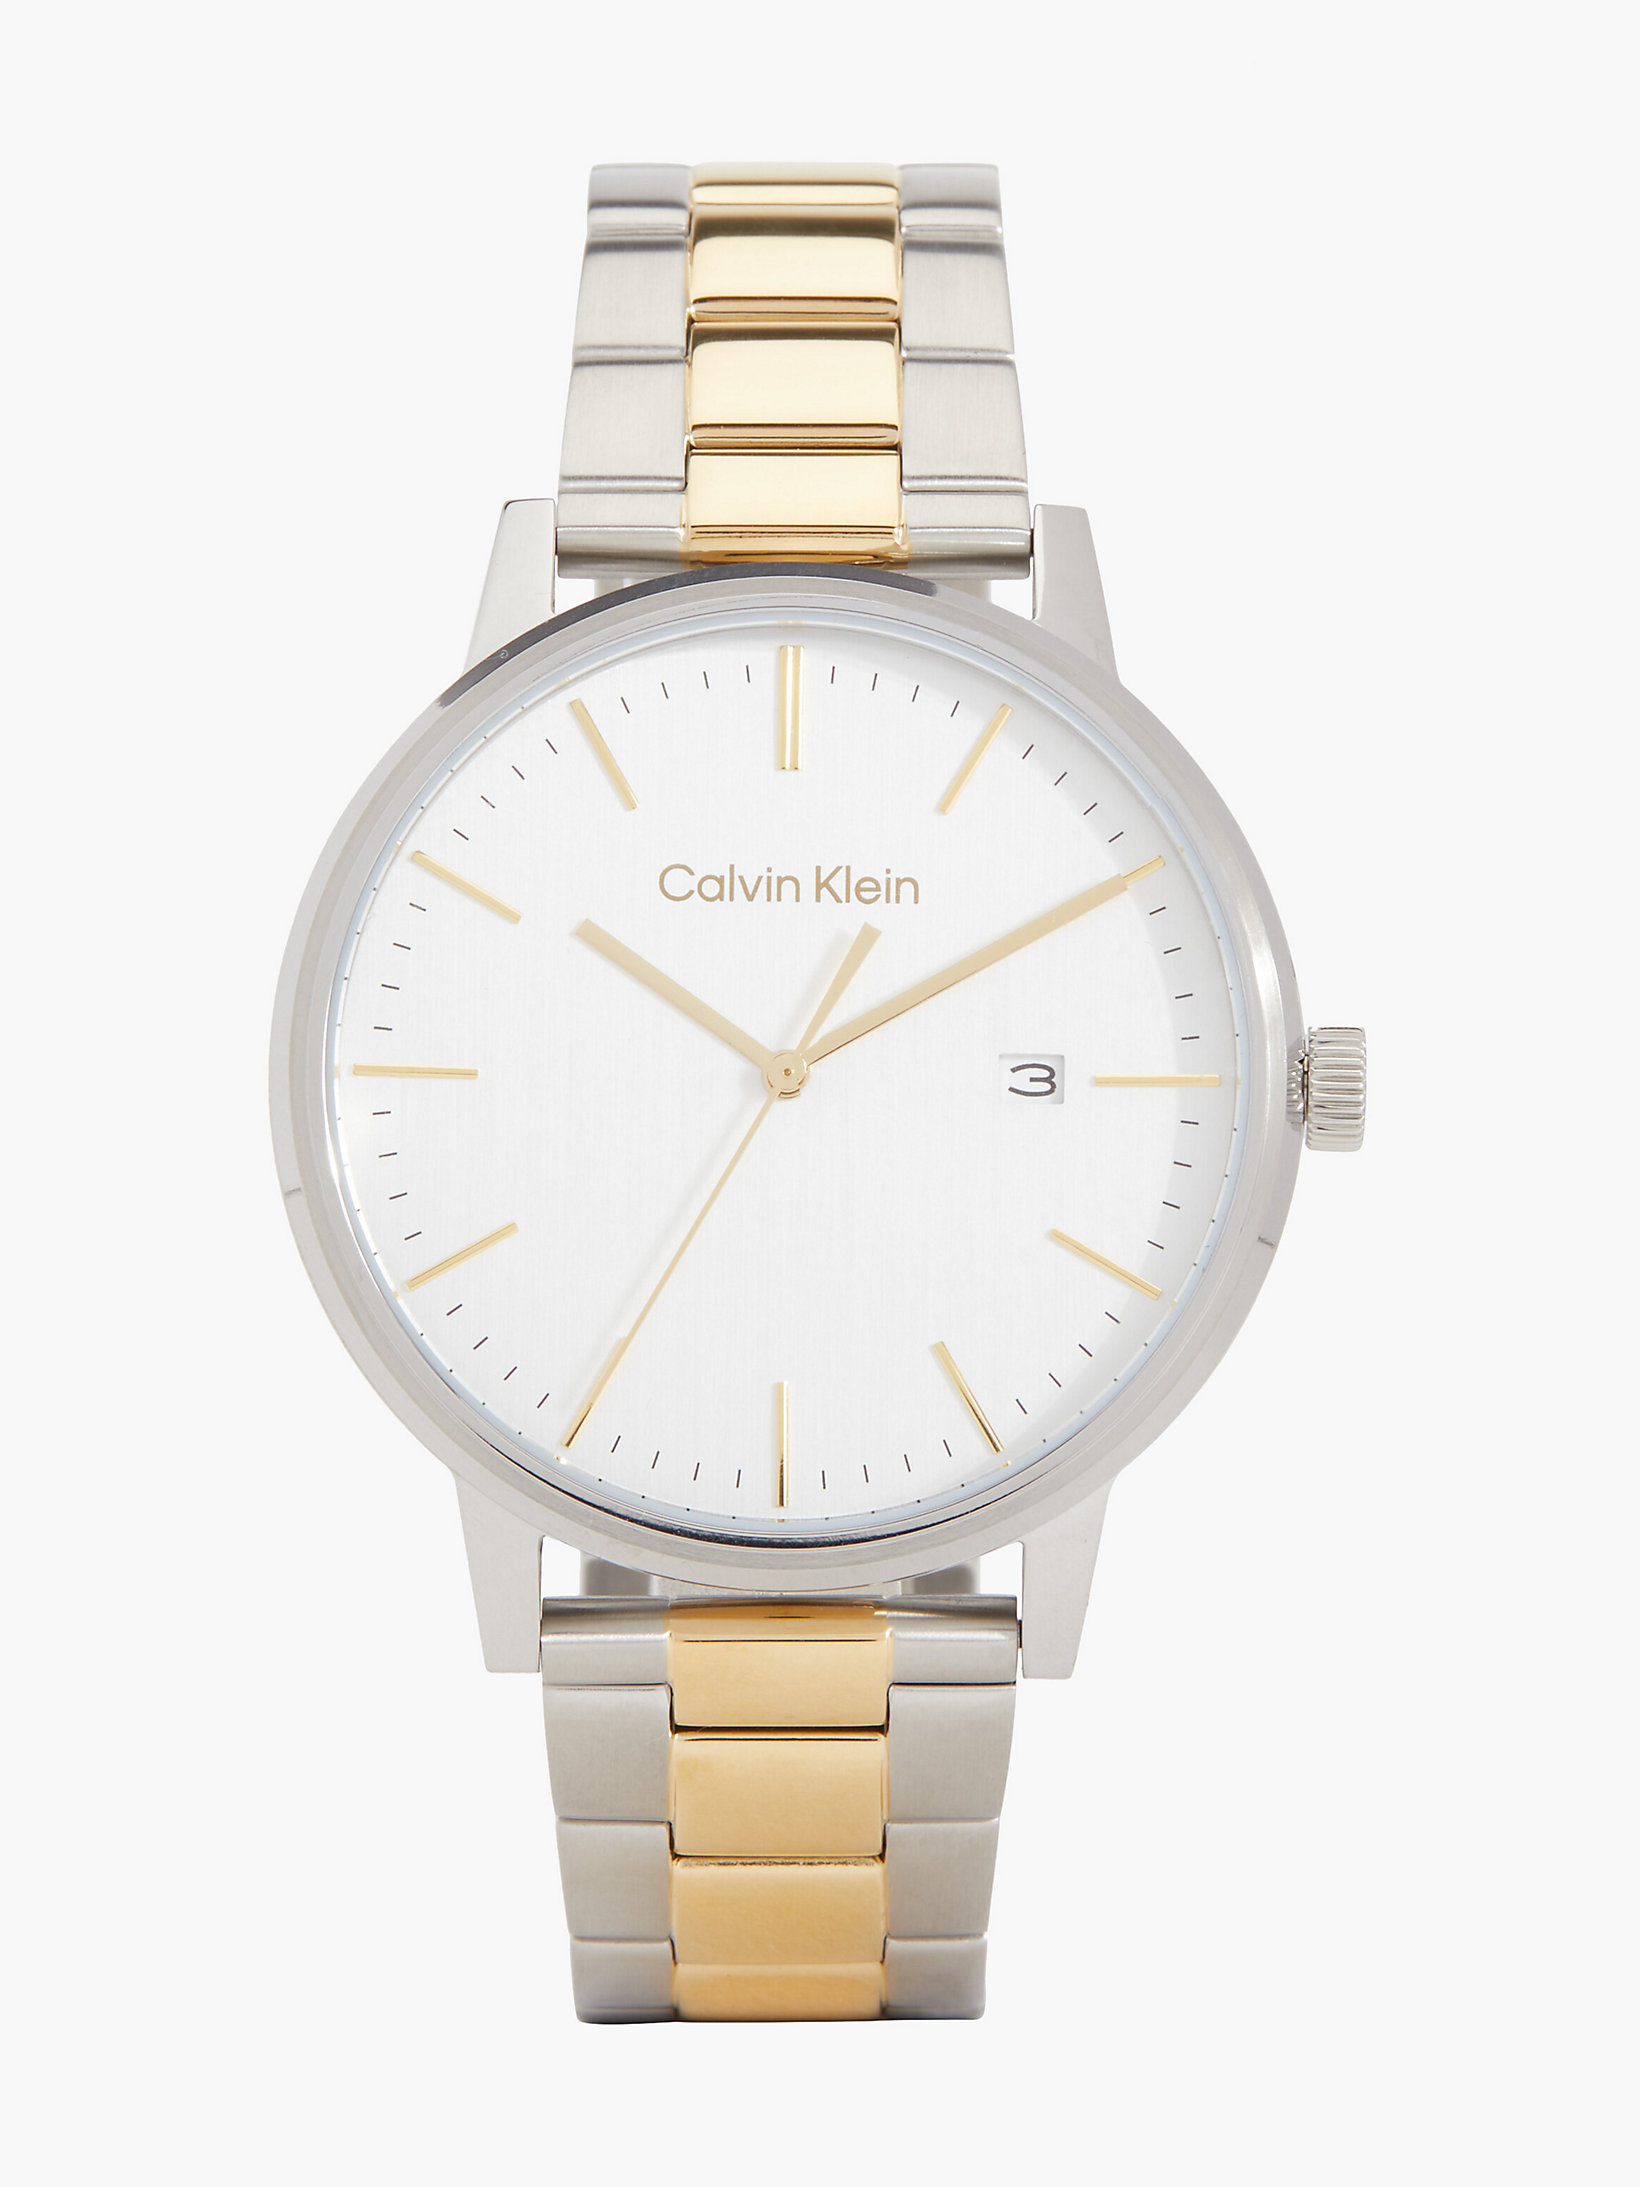 Montre - Linked > Two Tone > undefined hommes > Calvin Klein